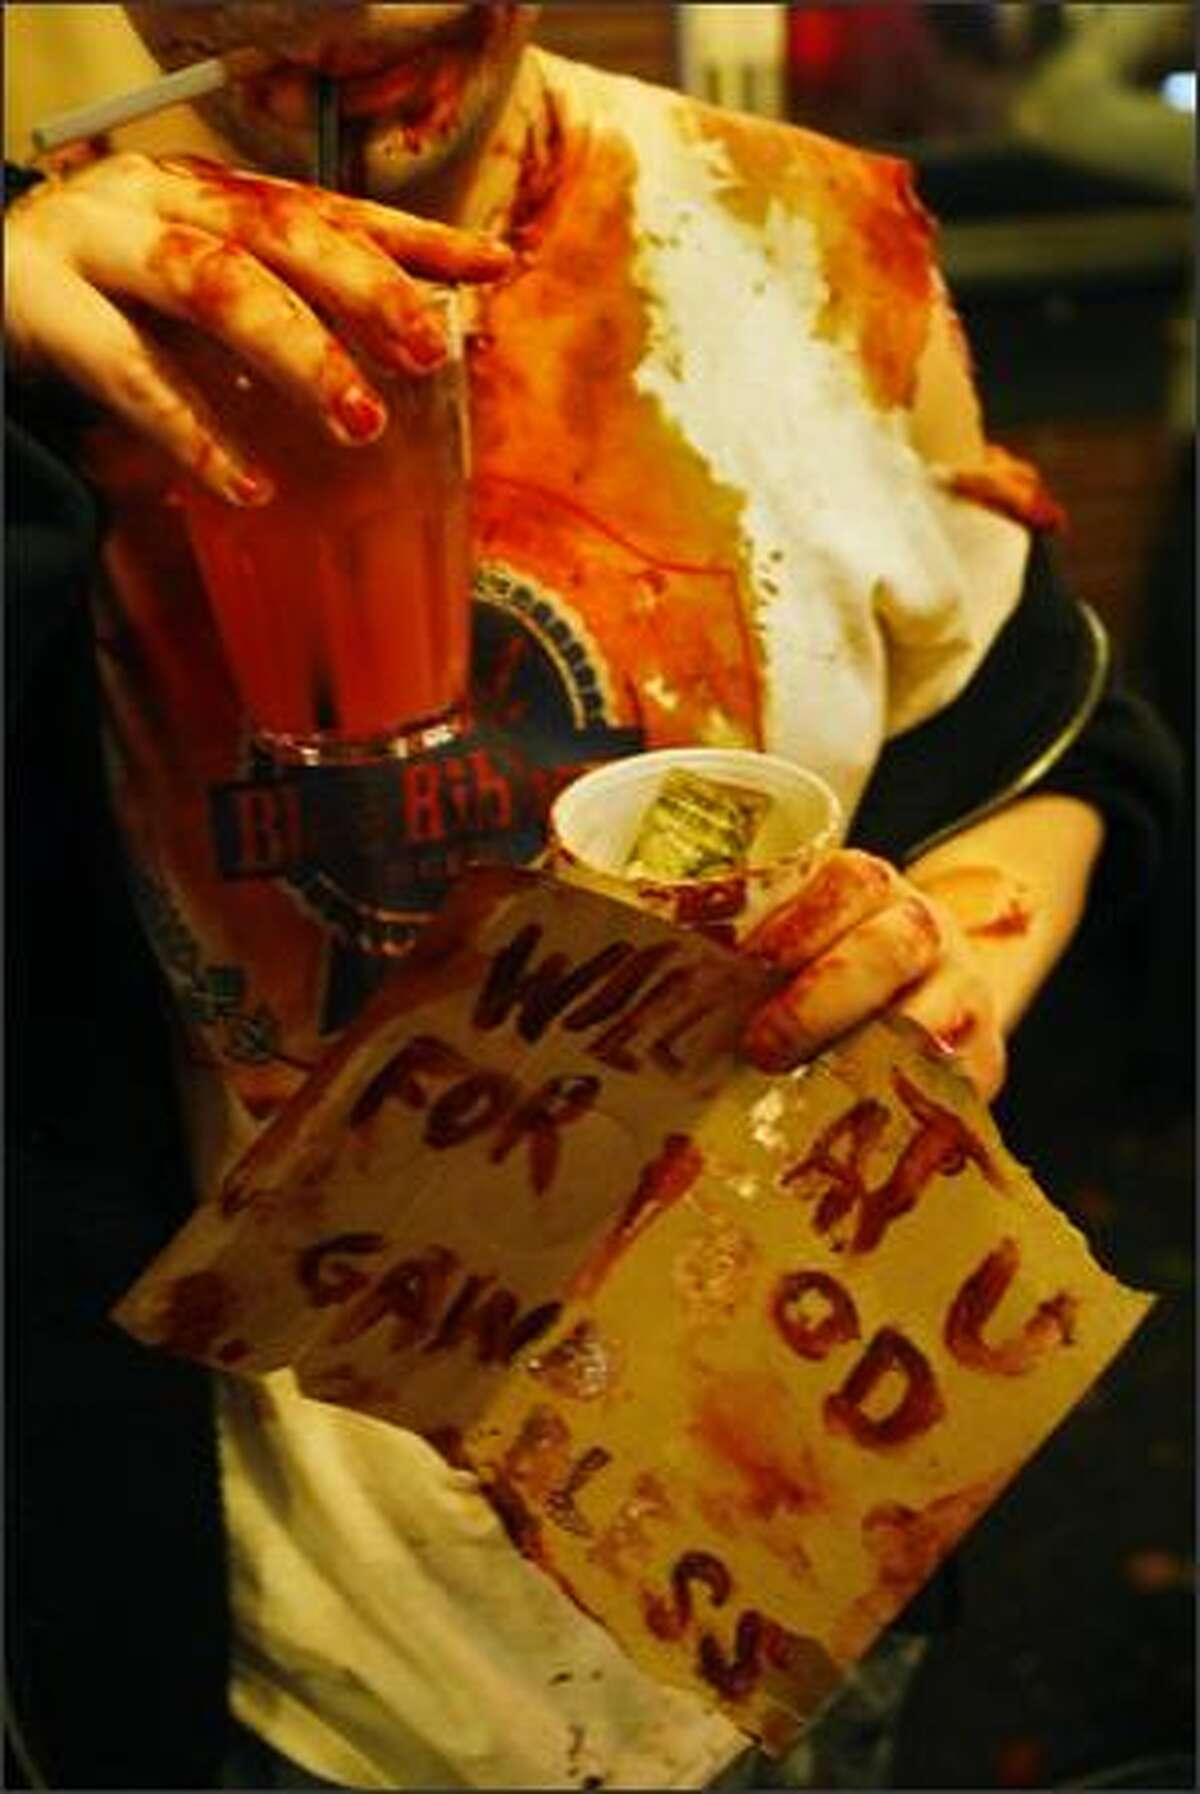 A "zombie" holds a sign that says "will eat u for food, gawd bless."